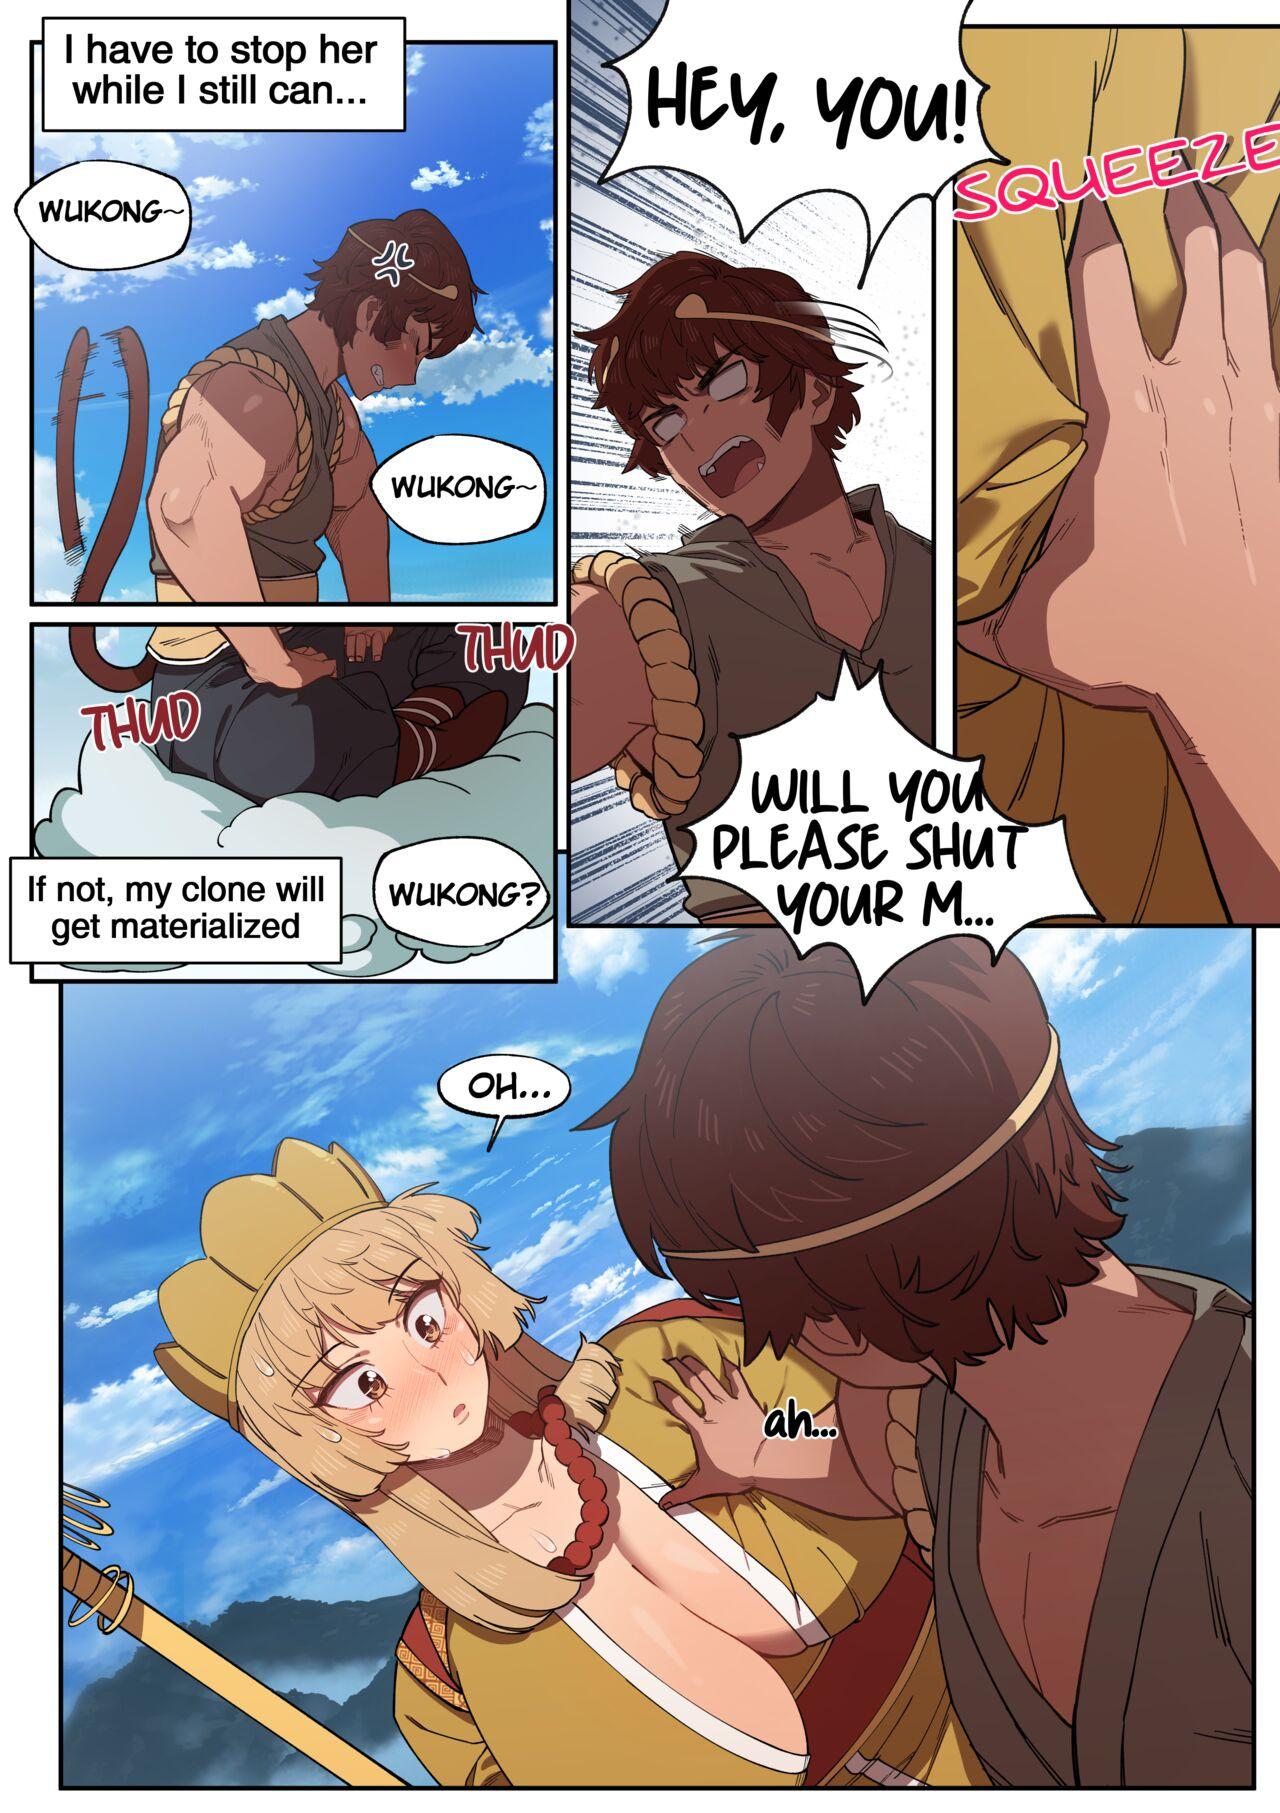 Blowjob Journey to the West - Journey to the west Bra - Page 2